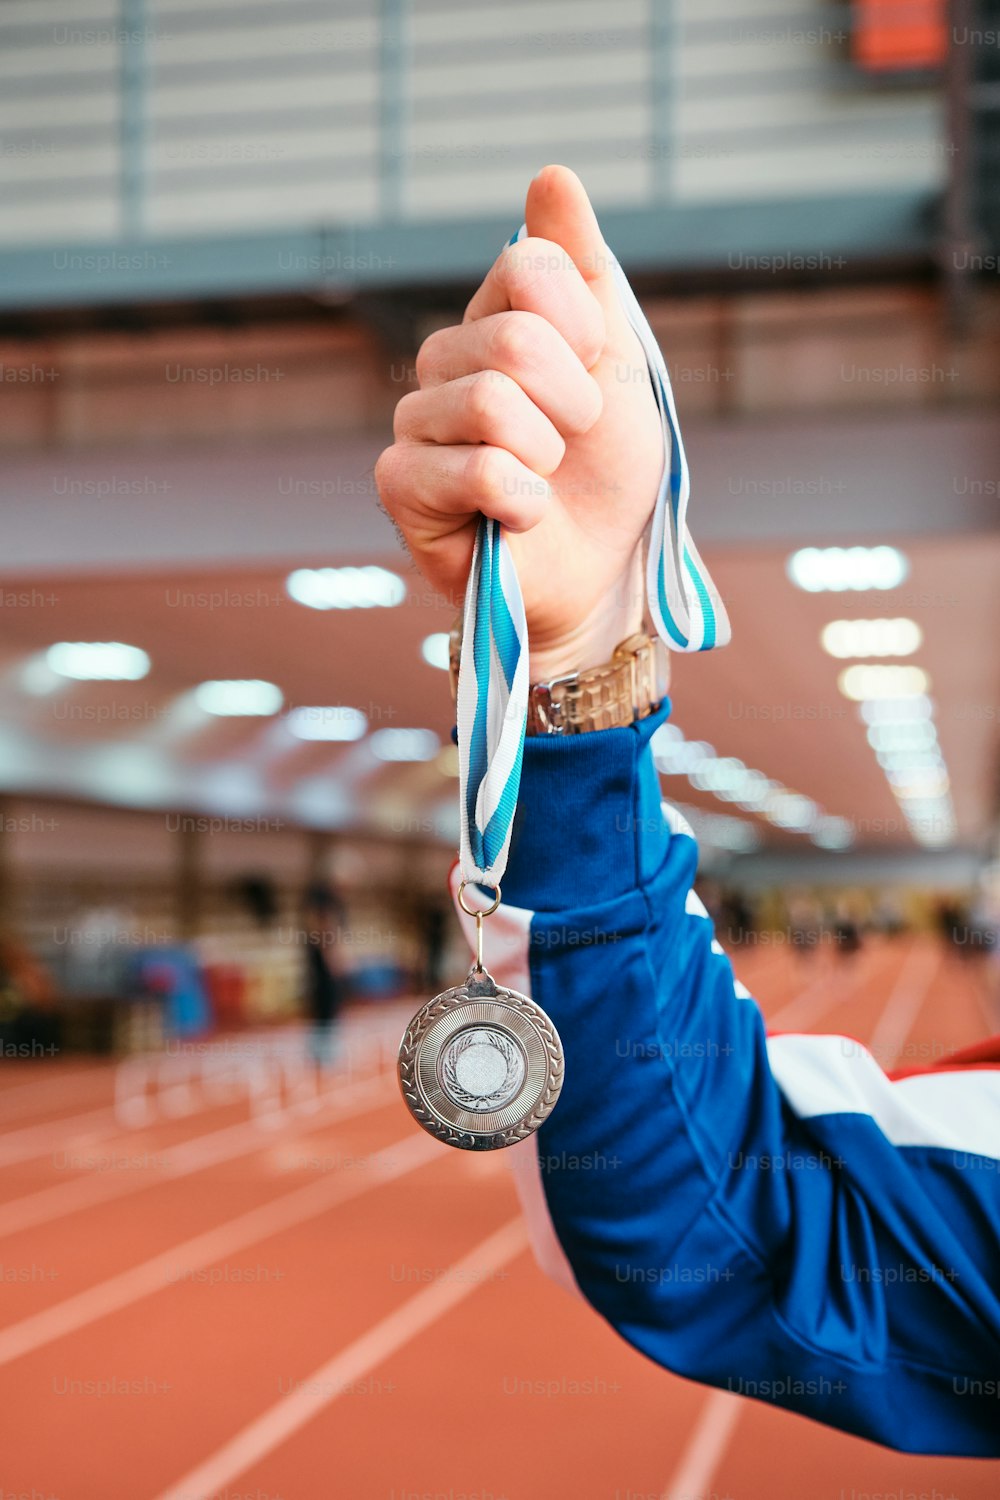 a person holding up a medal on a track